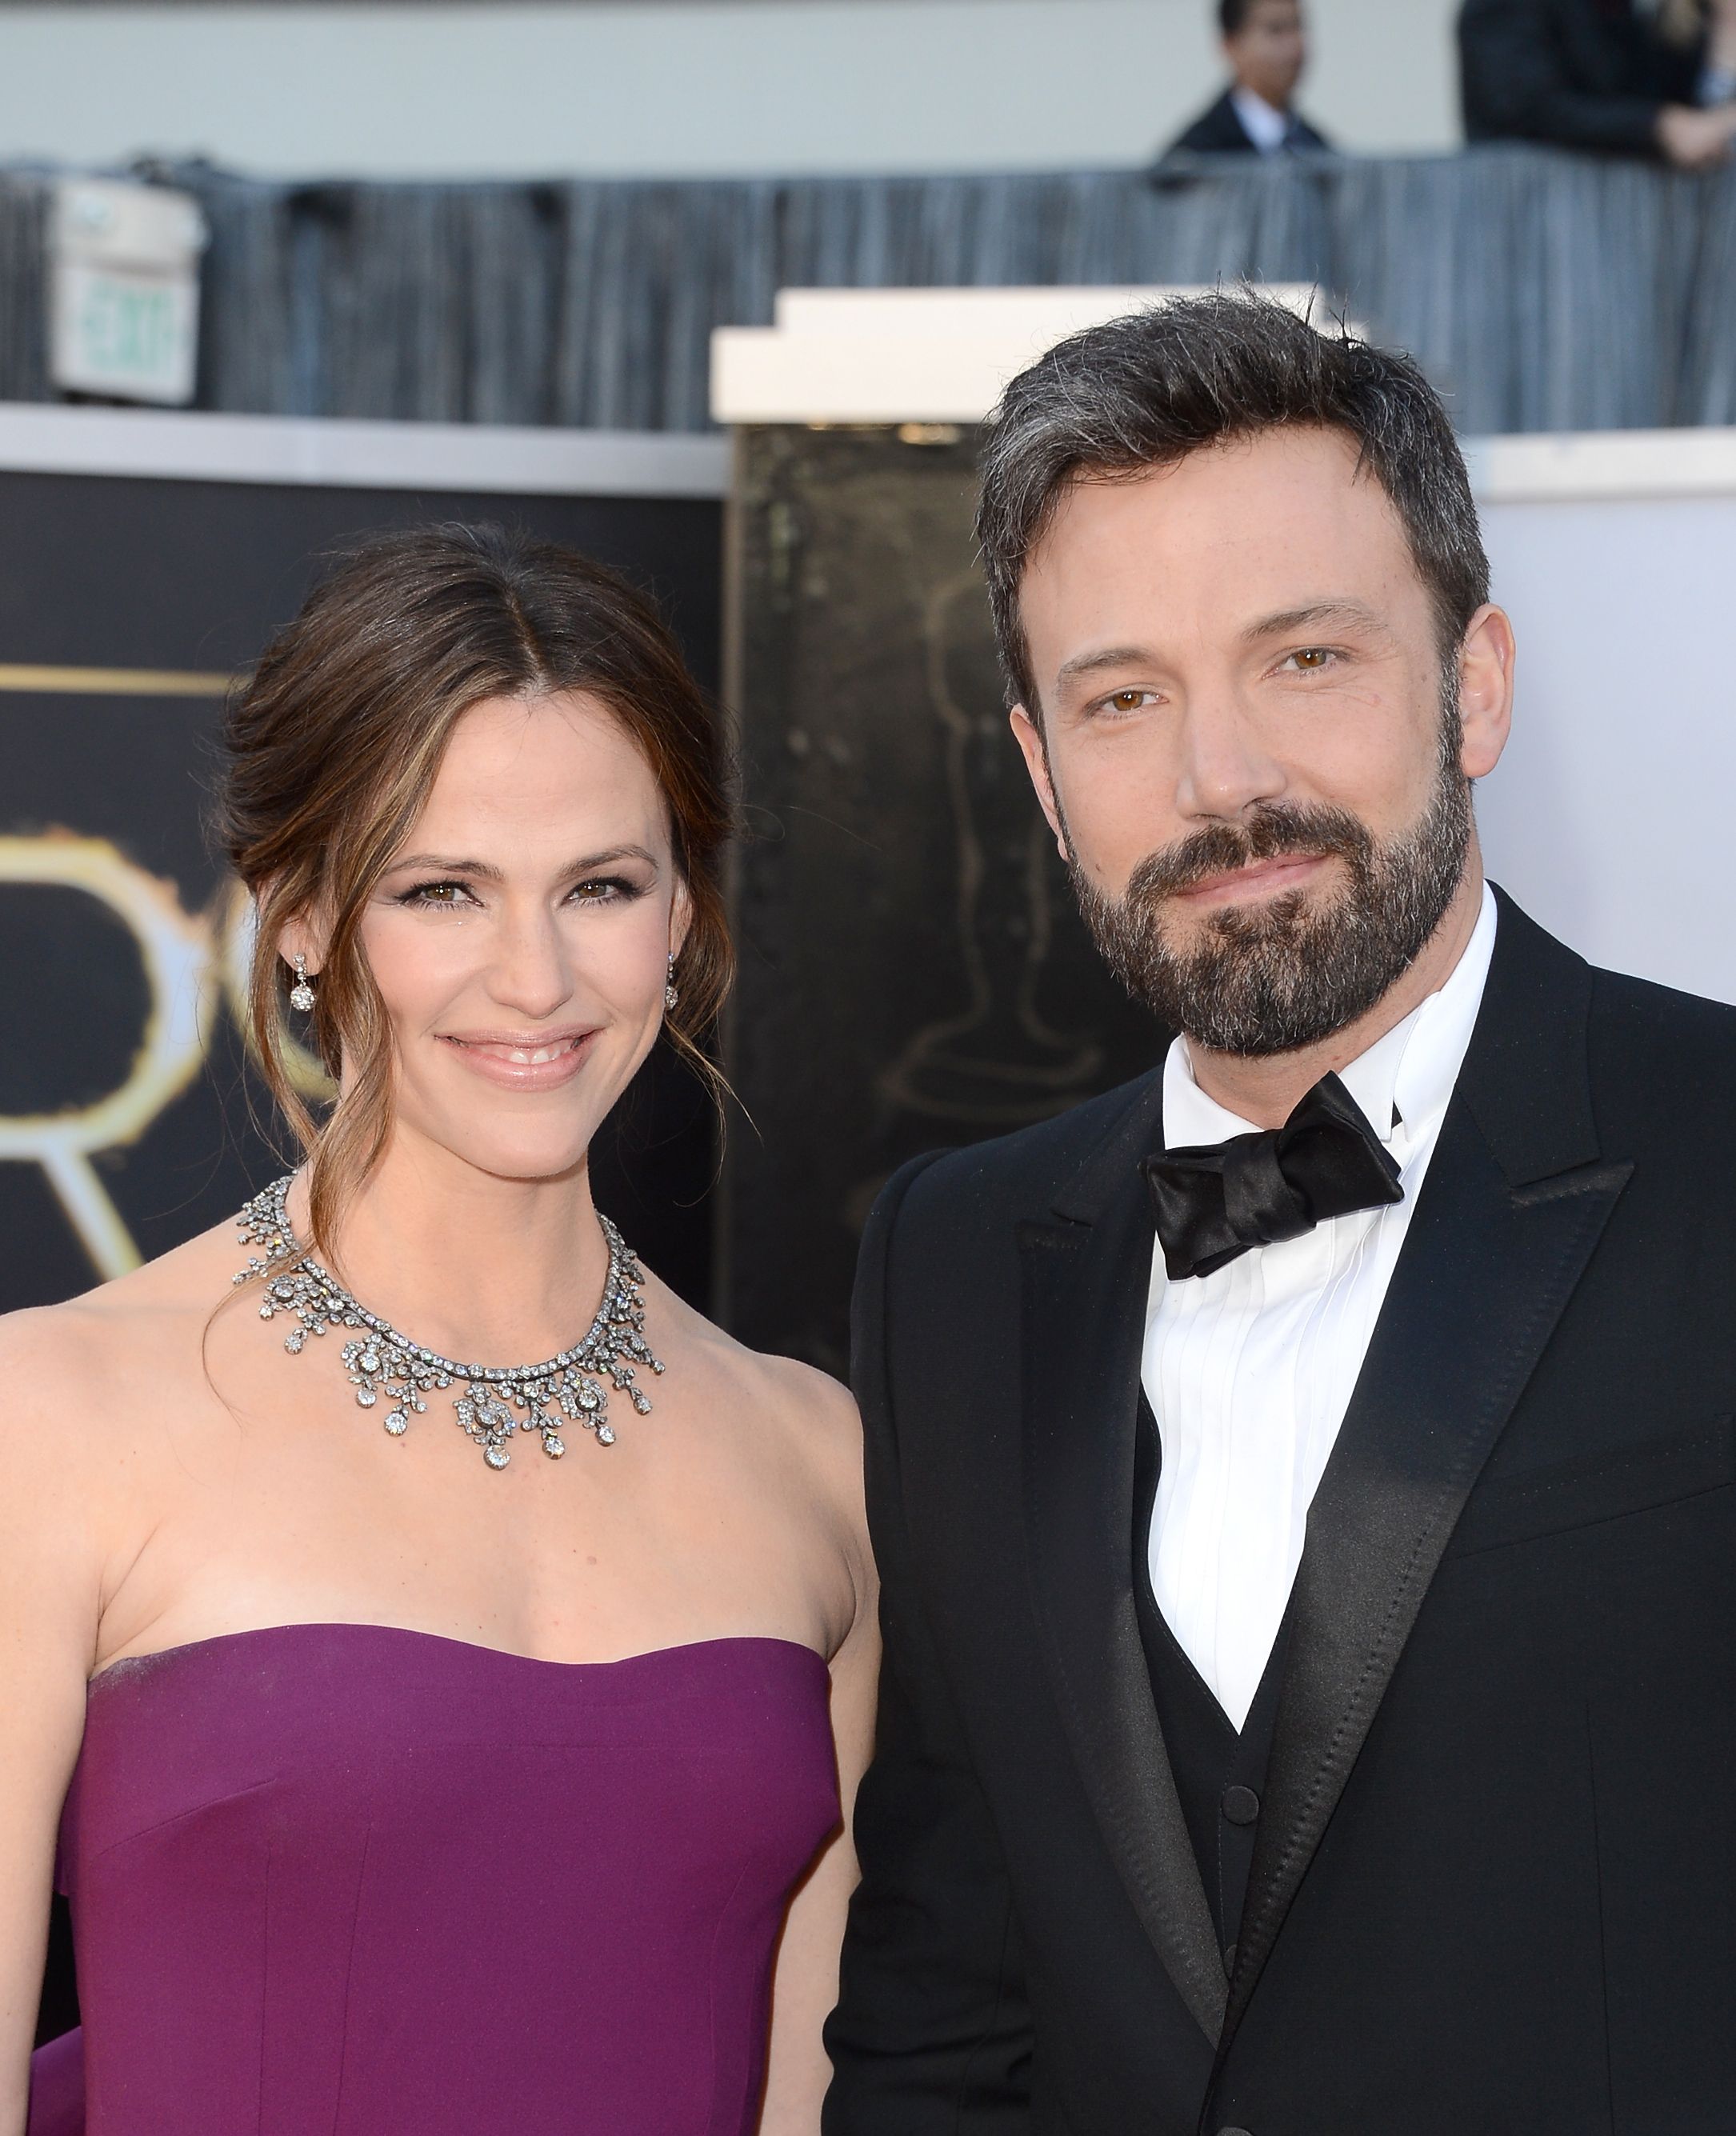 Jennifer Garner and Ben Affleck arrive at the Oscars at Hollywood & Highland Center on February 24, 2013 in Hollywood, California. | Photo: Getty Images